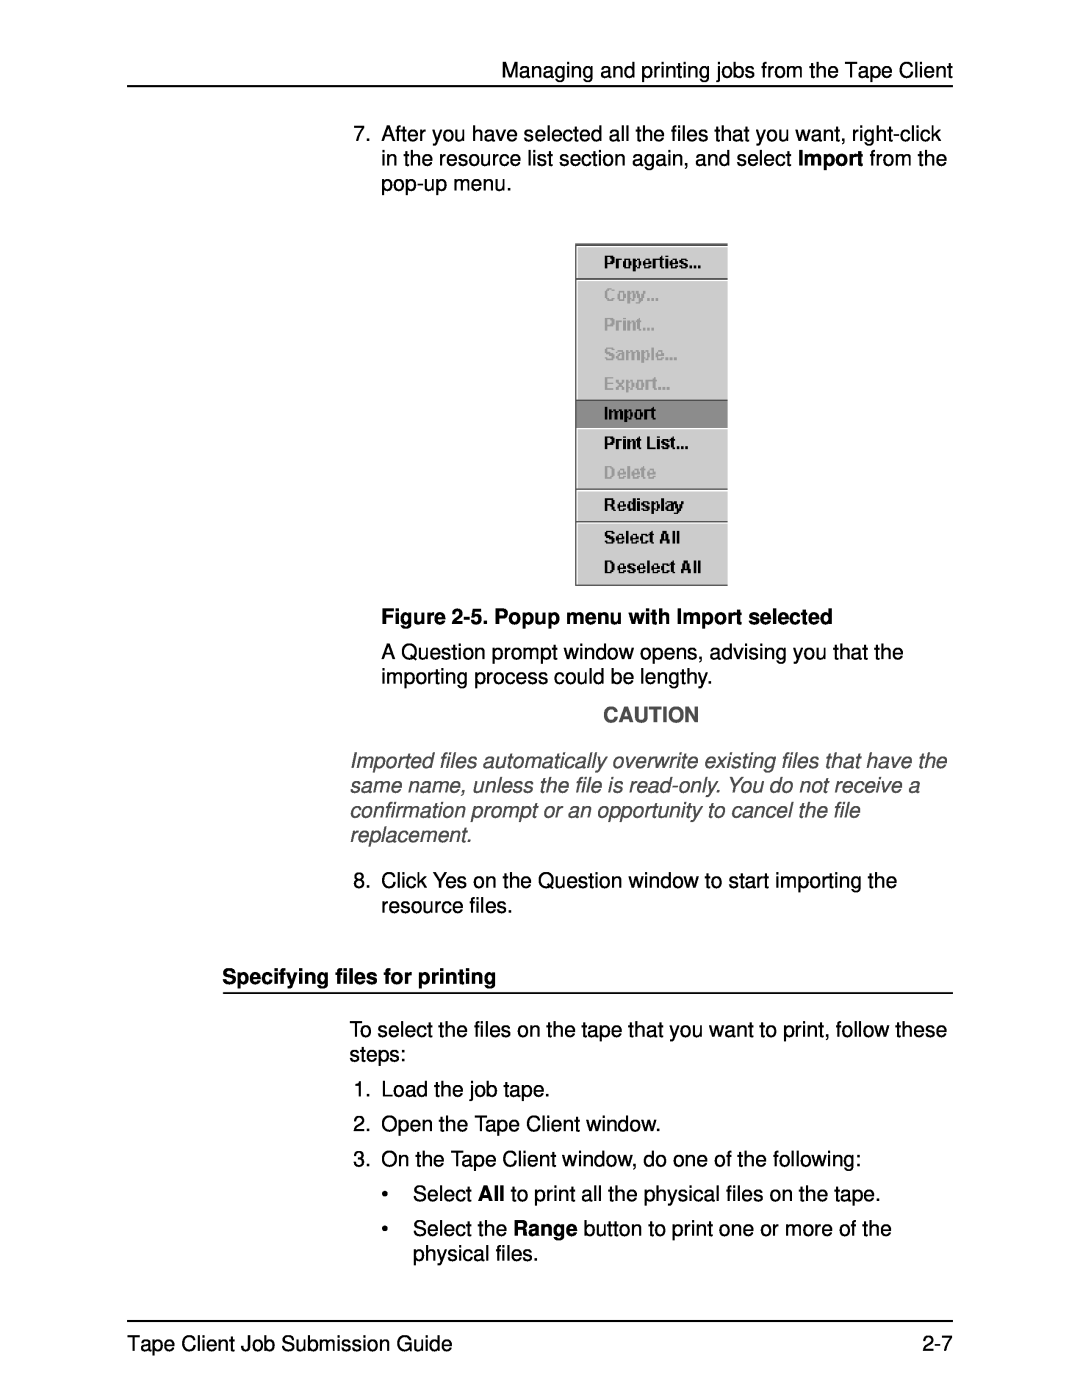 Xerox 701P21110 manual 5.Popup menu with Import selected, Specifying files for printing 